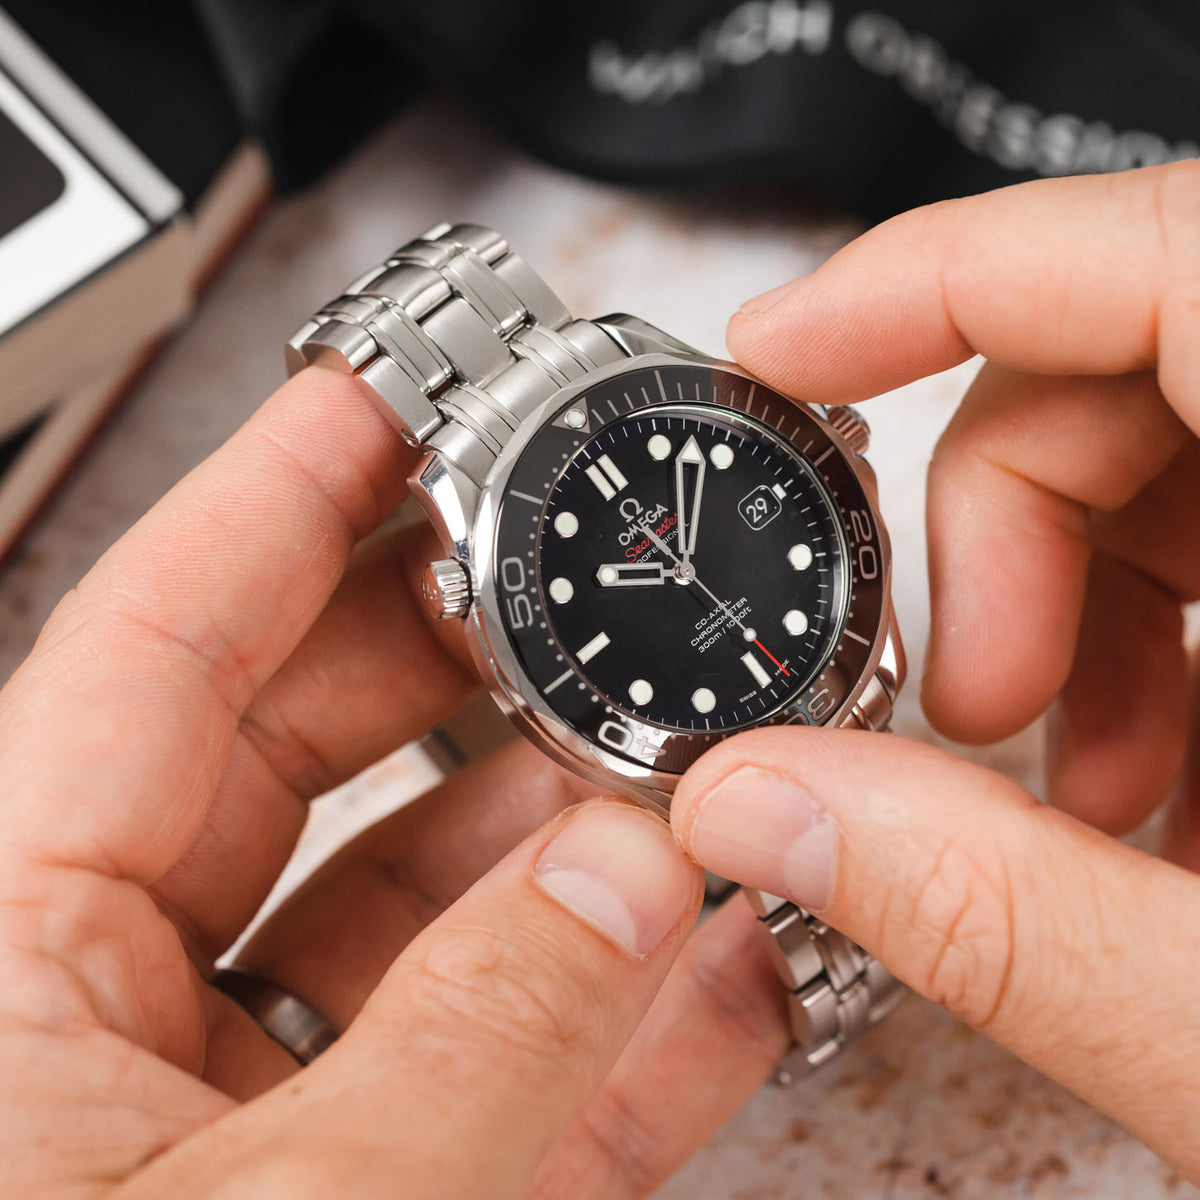 How Does A Dive Watch Bezel Work?